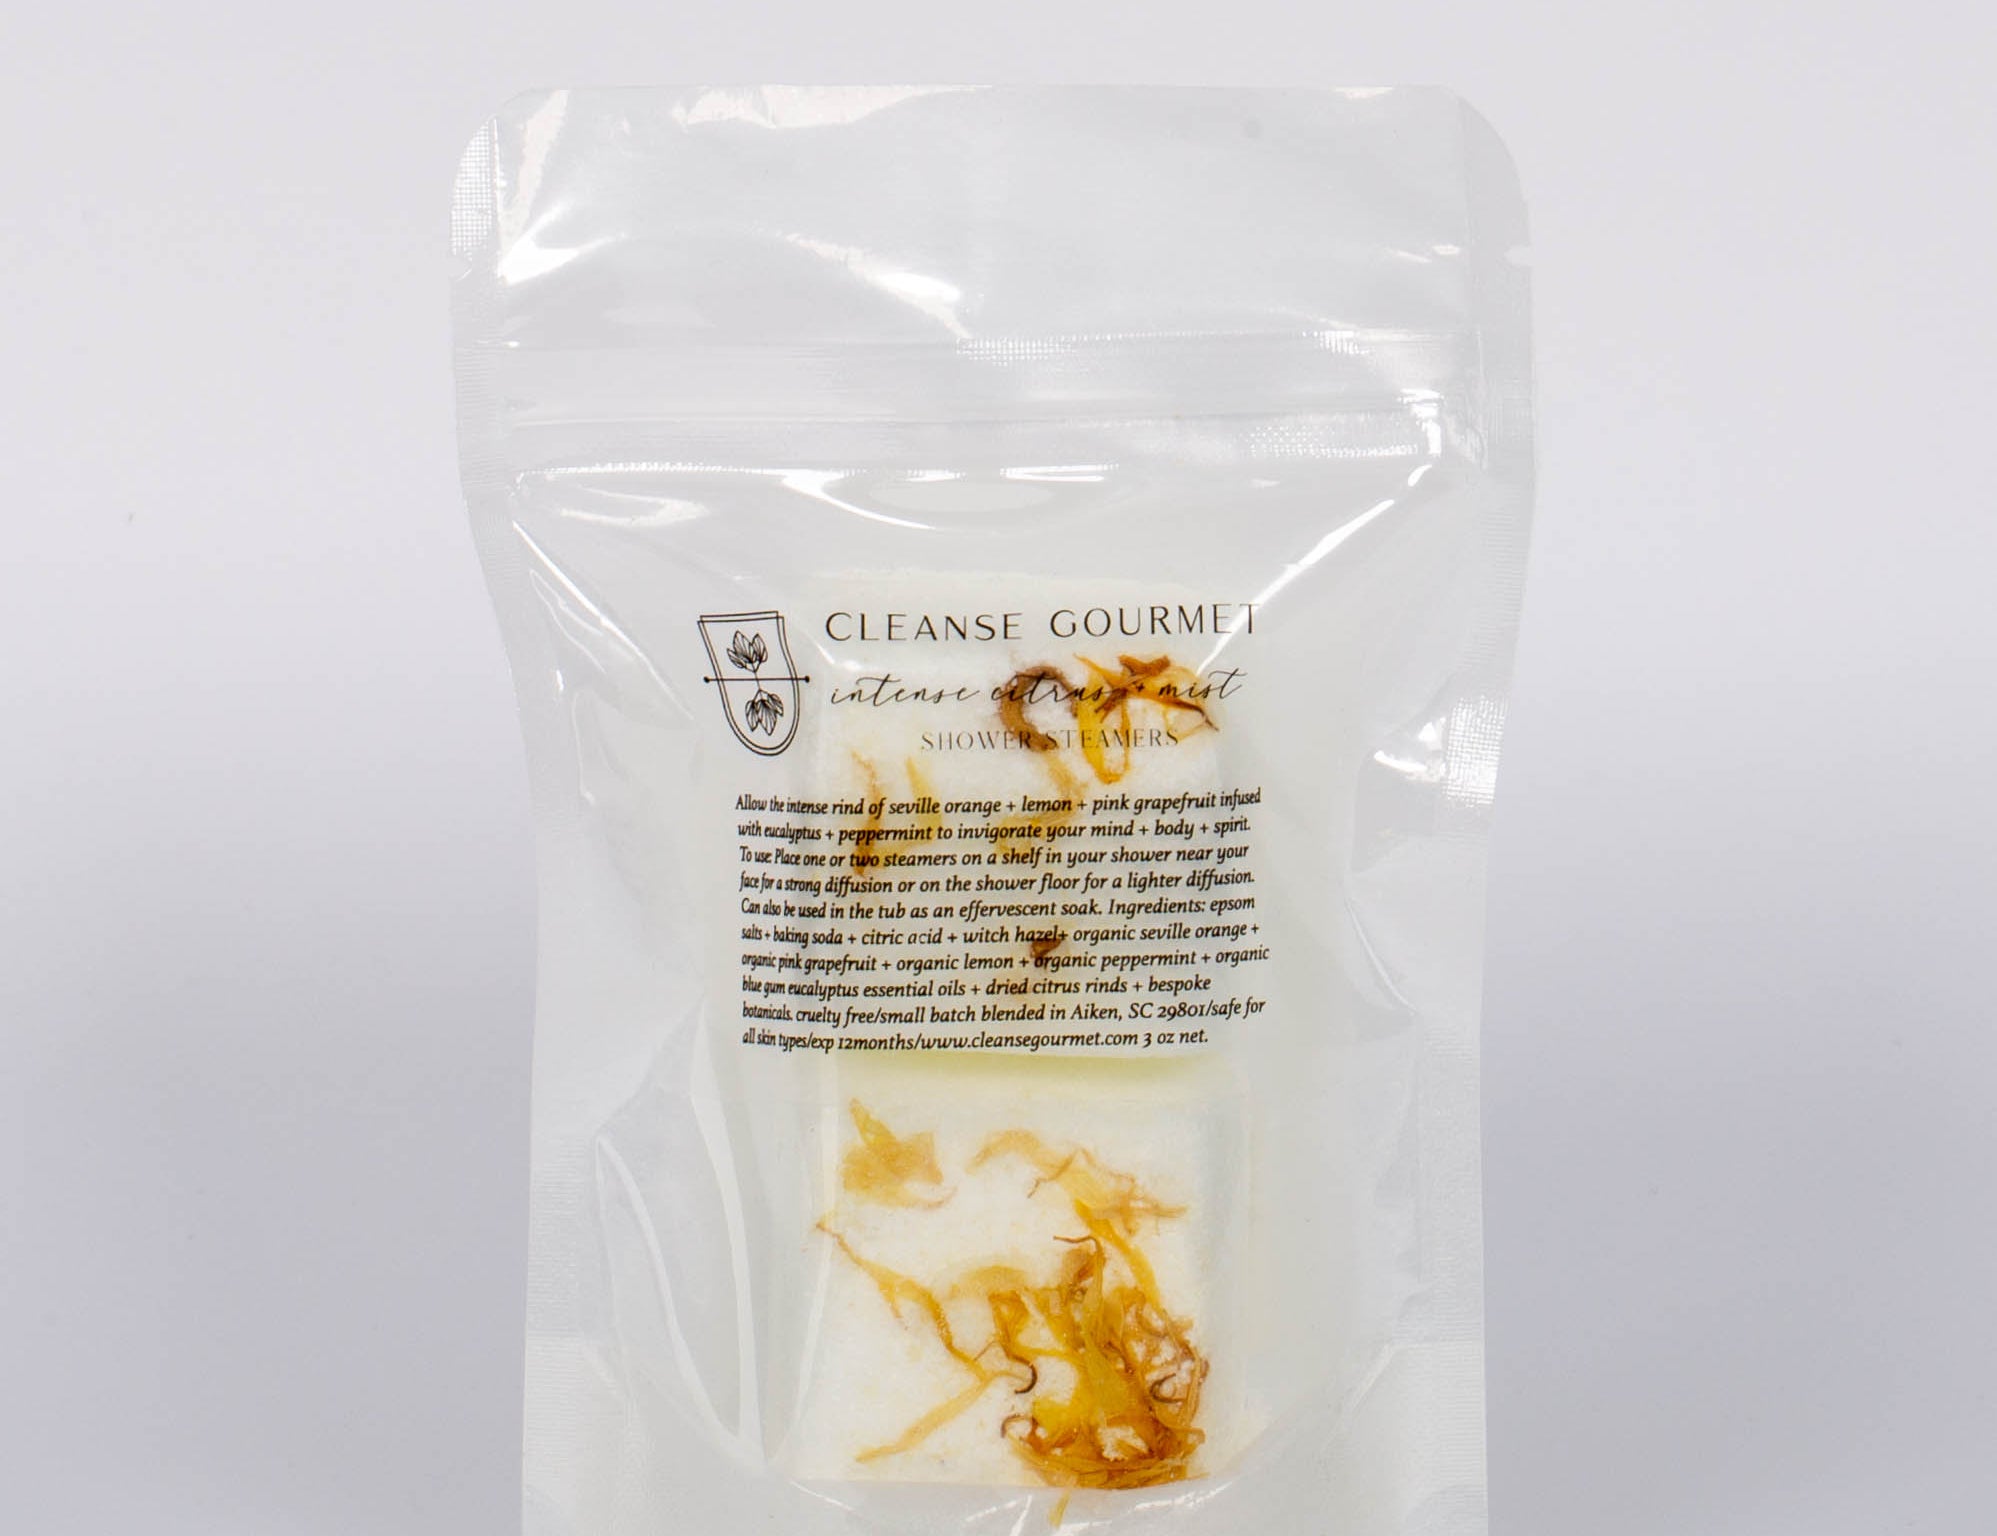 Clear package of two Invigorate Shower Steamers Organic Citrus by Cleanse Gourmet.